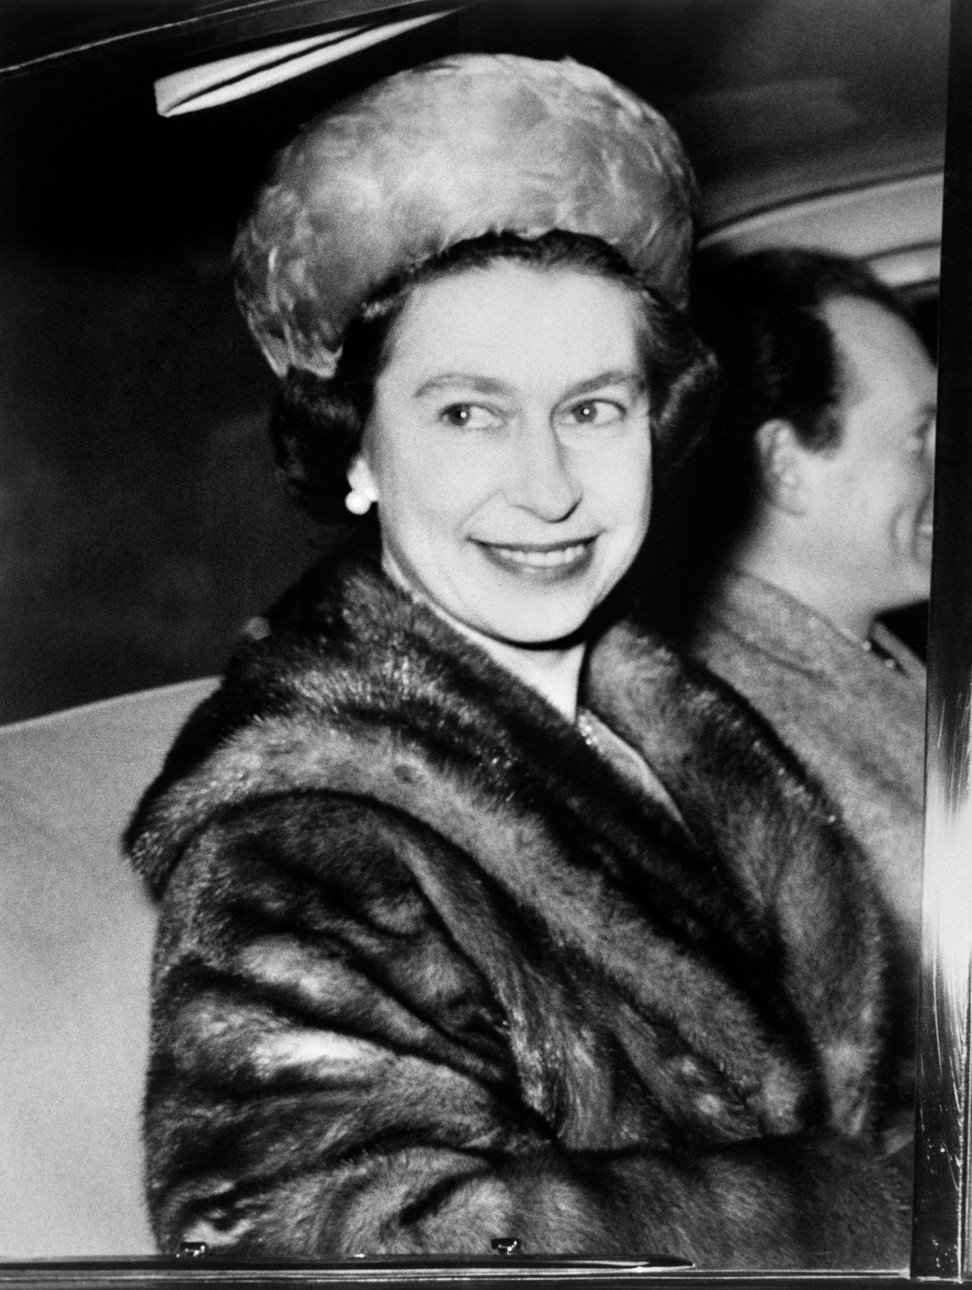 A thing of the past? Britain's Queen Elizabeth is pictured wearing fur in 1969. Photo: Central Press/AFP